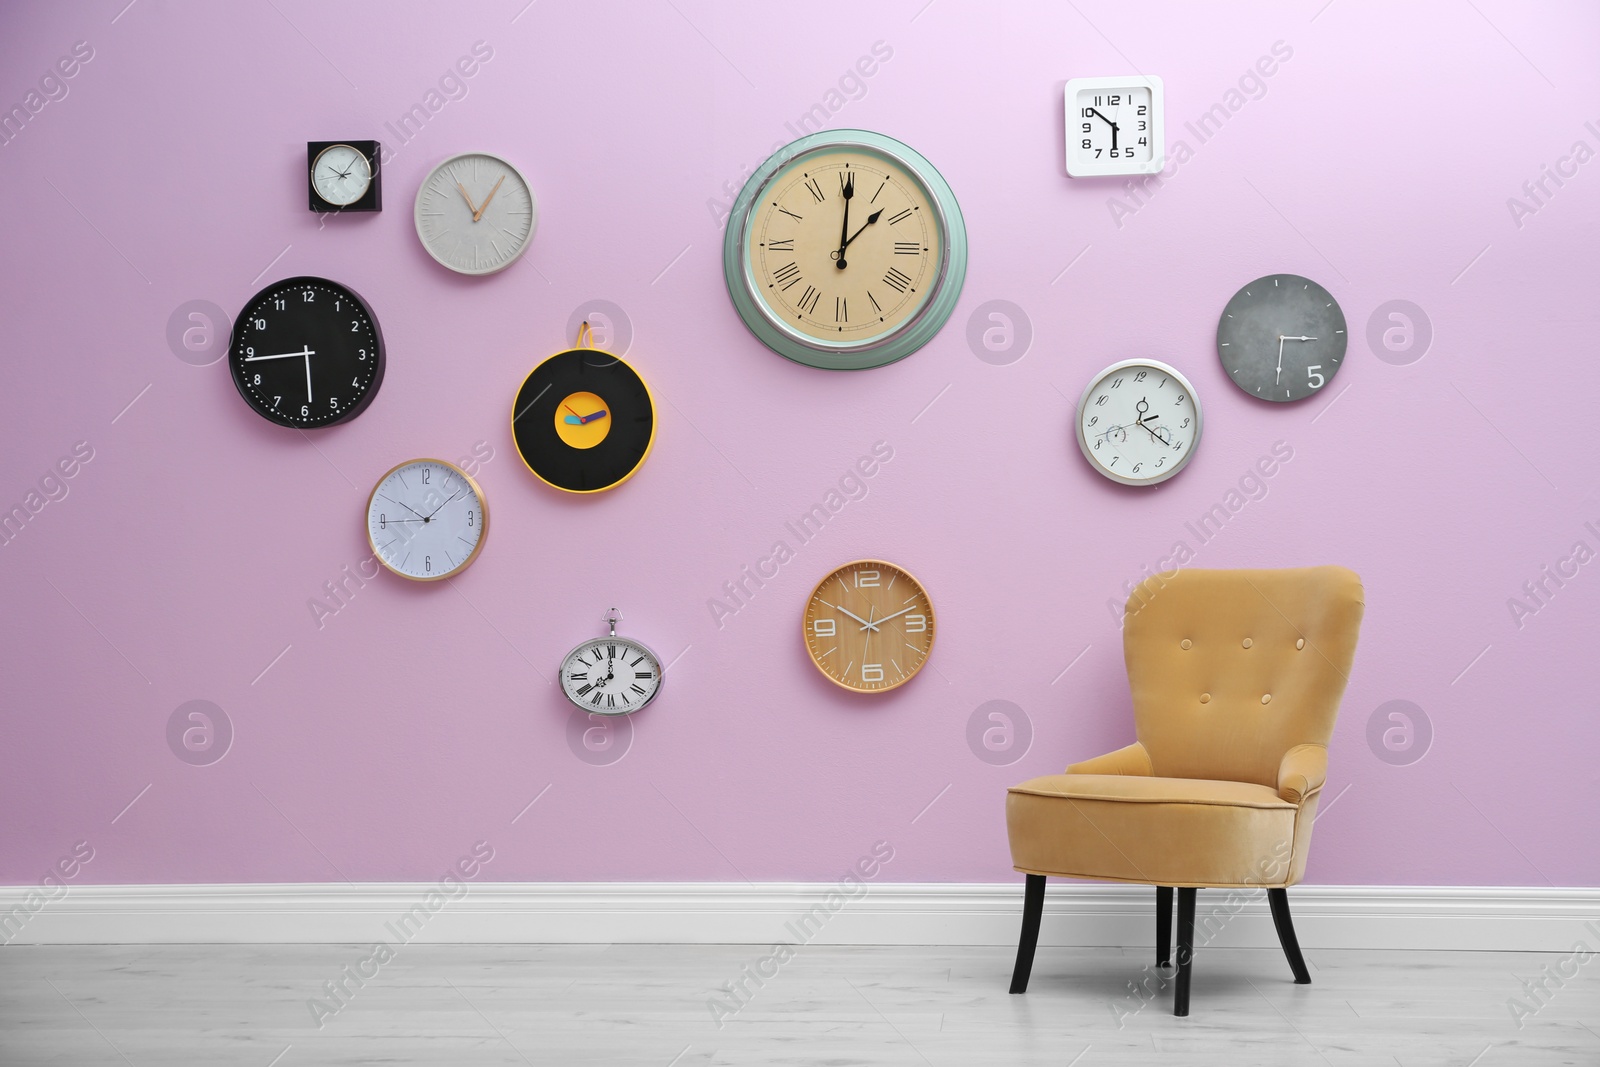 Photo of Room interior with many different clocks on wall. Time of day